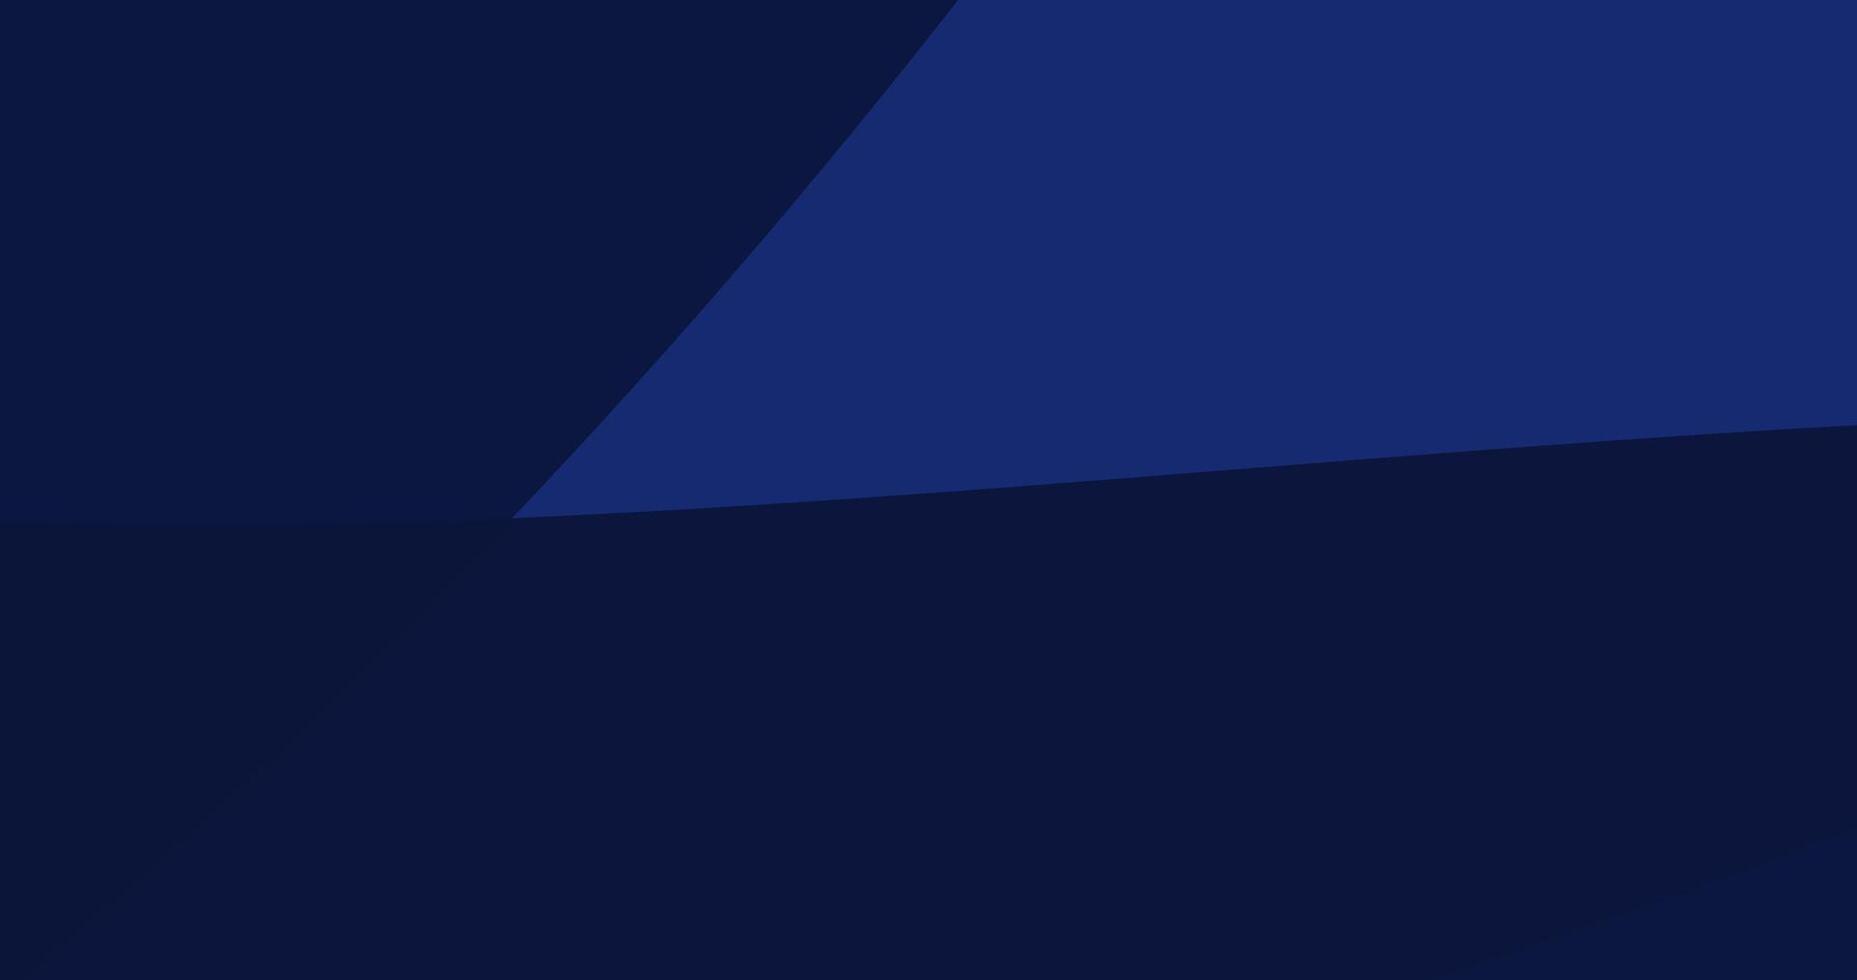 abstract navy blue corporate background vector